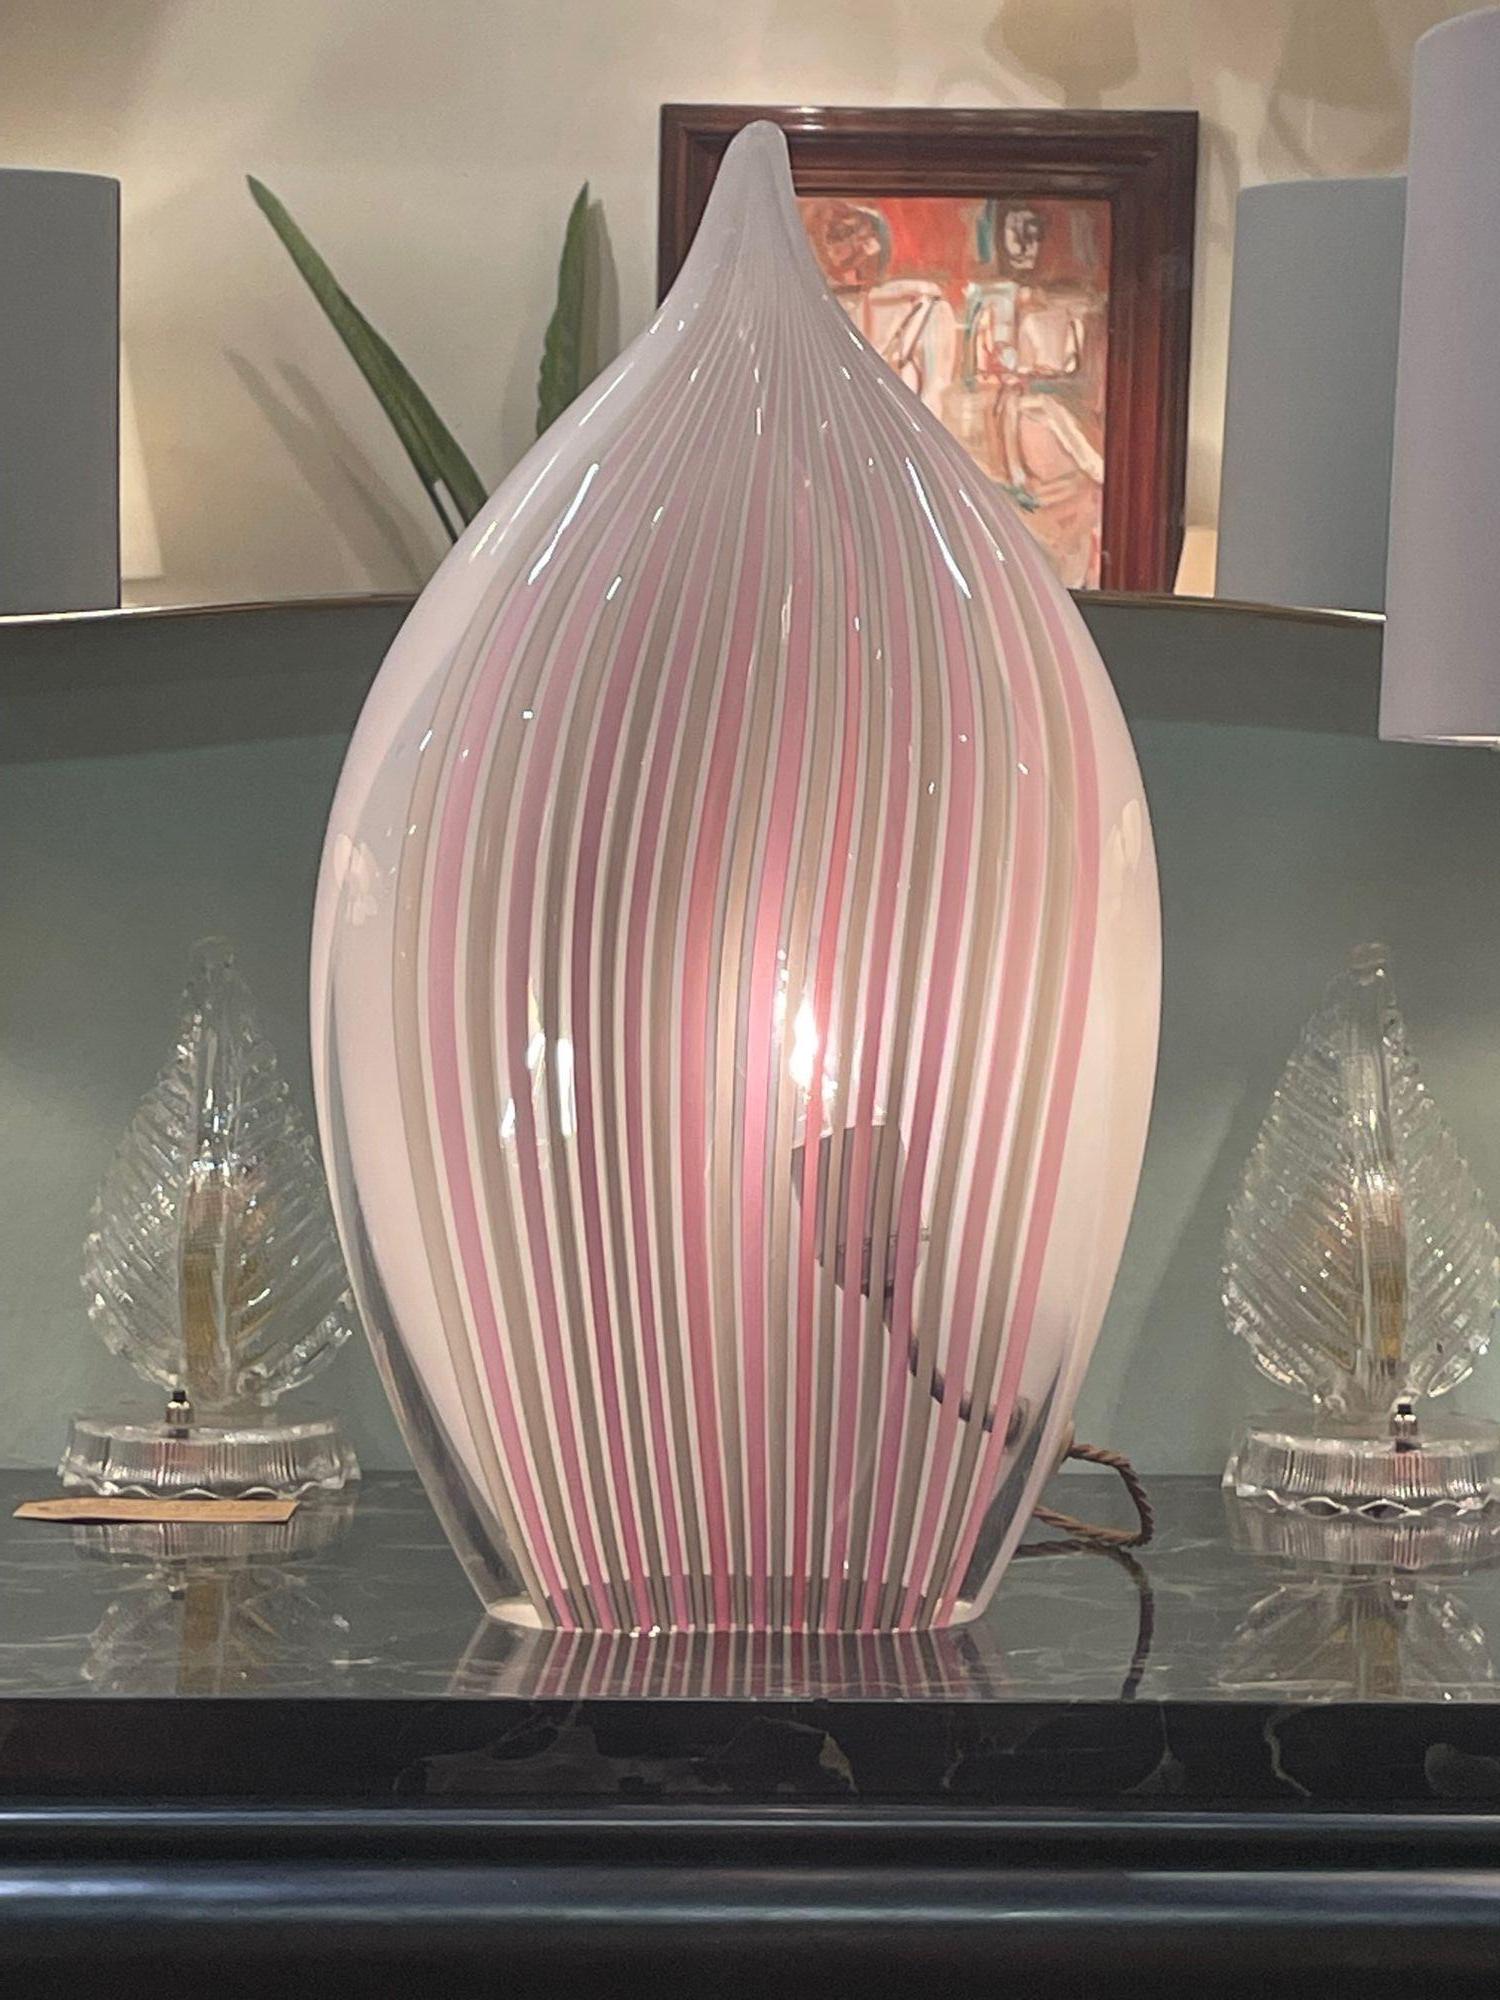 A large rare Murano glass, tear drop shaped pink and white lamp by Lino Tagliapietra for La Murrina, Italy 1960s. With single brass fitting inside. Re wired with antique cord flex and switch and PAT tested. The glass work is absolutely stunning